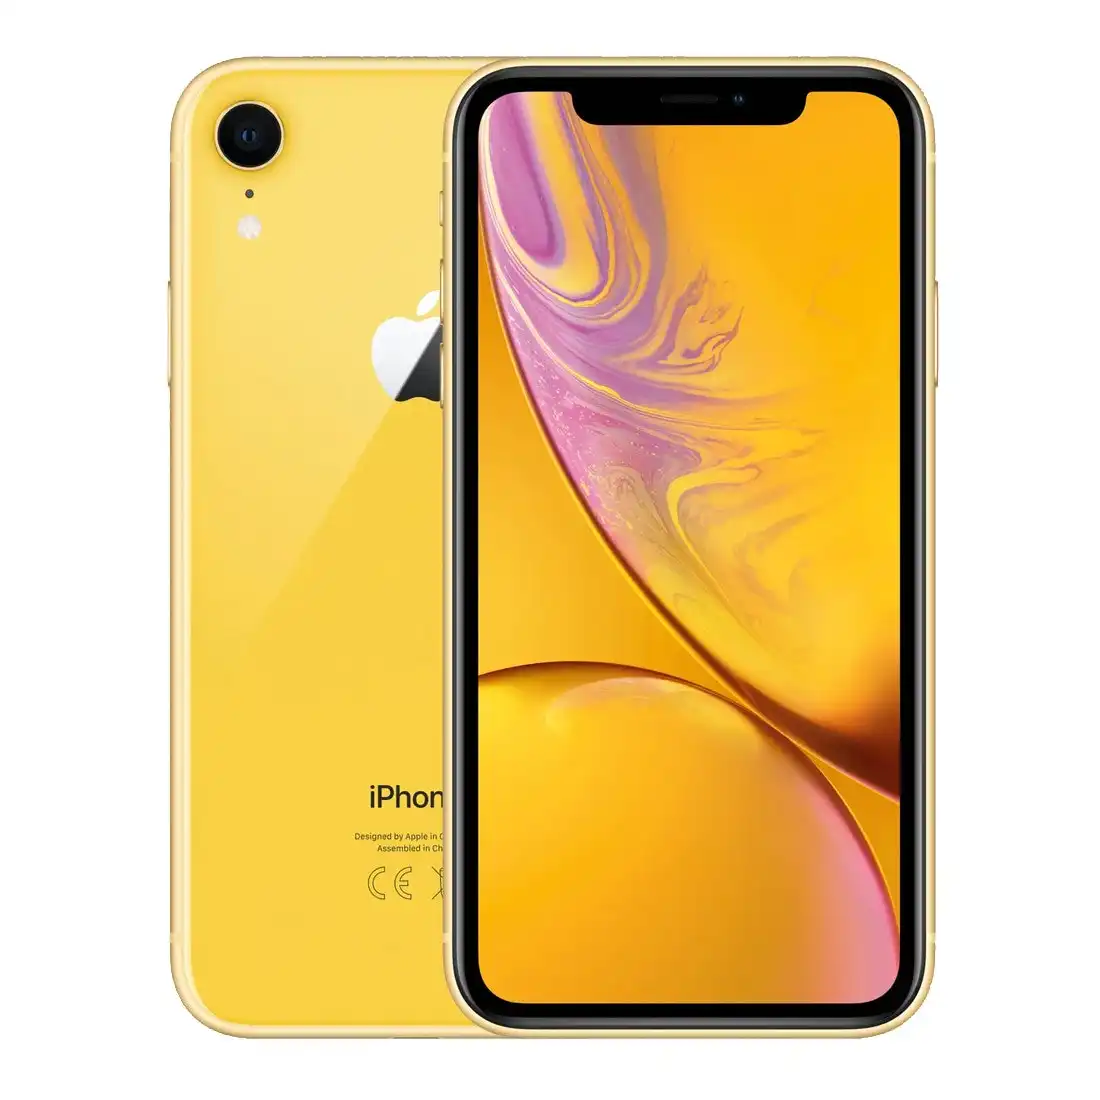 Apple iPhone XR 64GB - Yellow [Refurbished] - Excellent